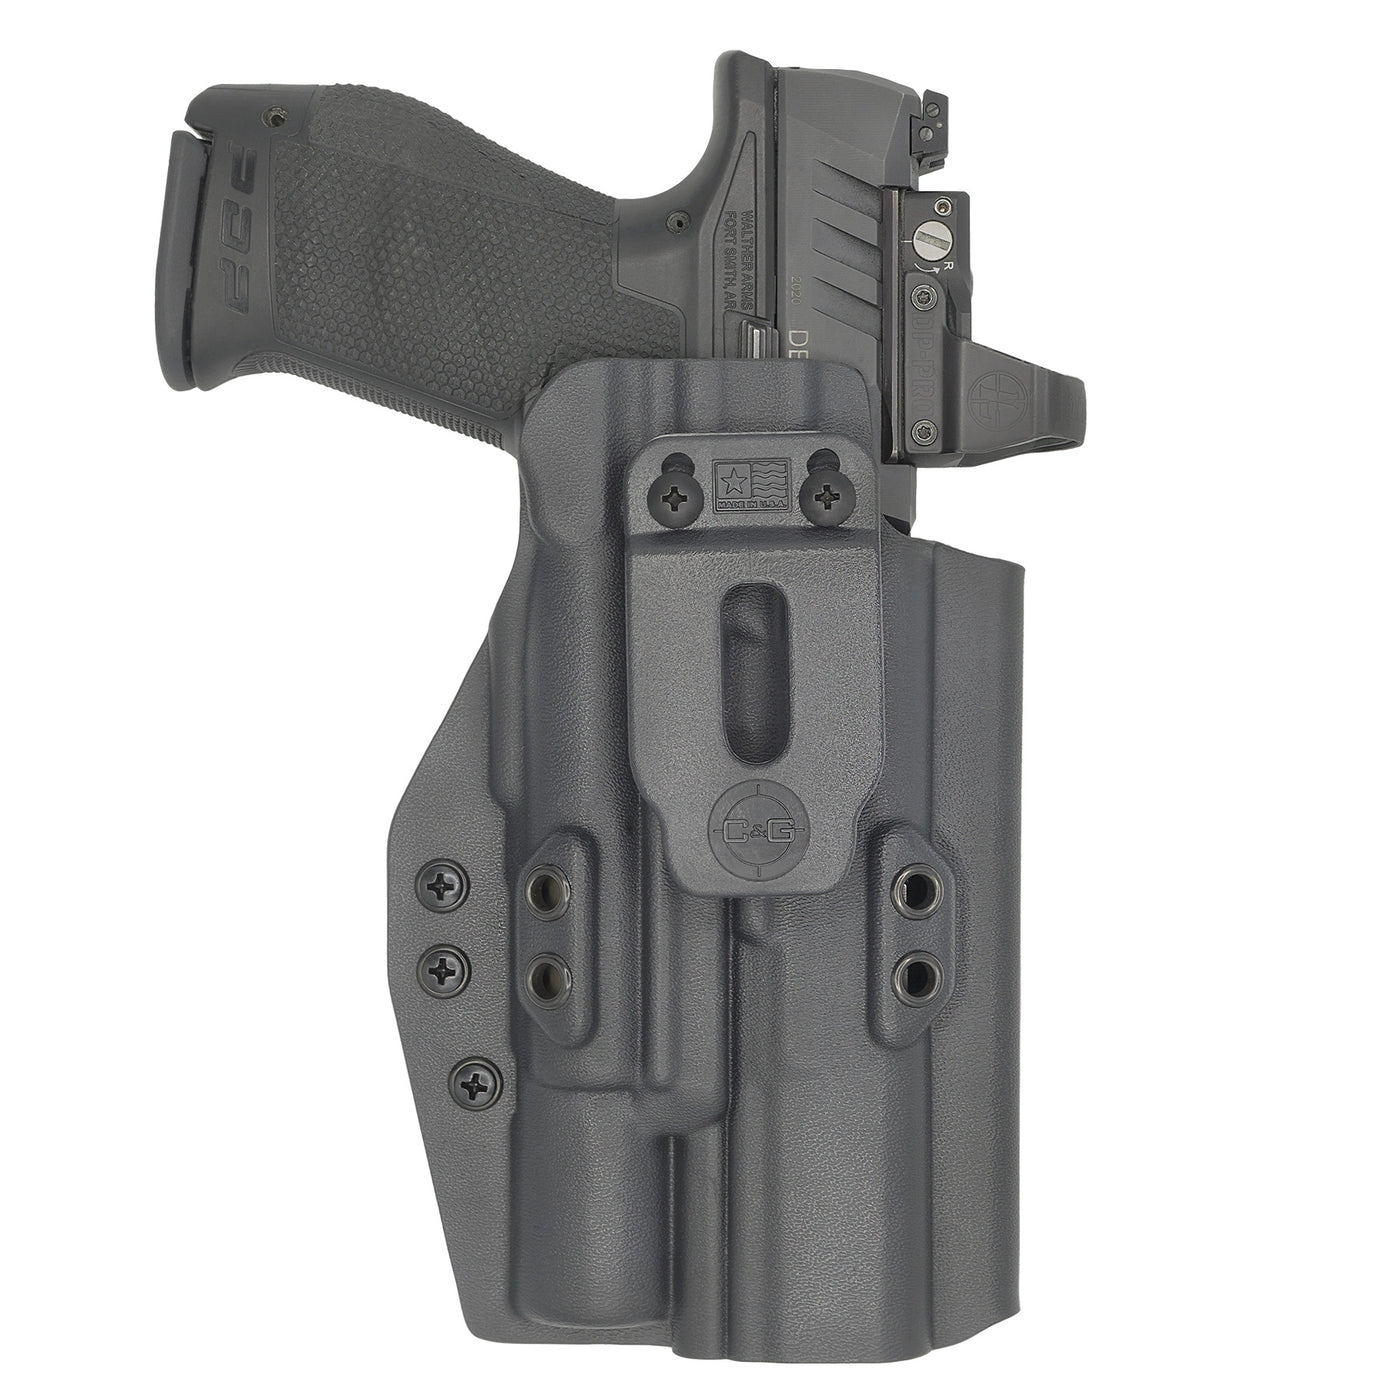 C&G Holsters quickship IWB Tactical M&P 10/45 Surefire X300 in holstered position